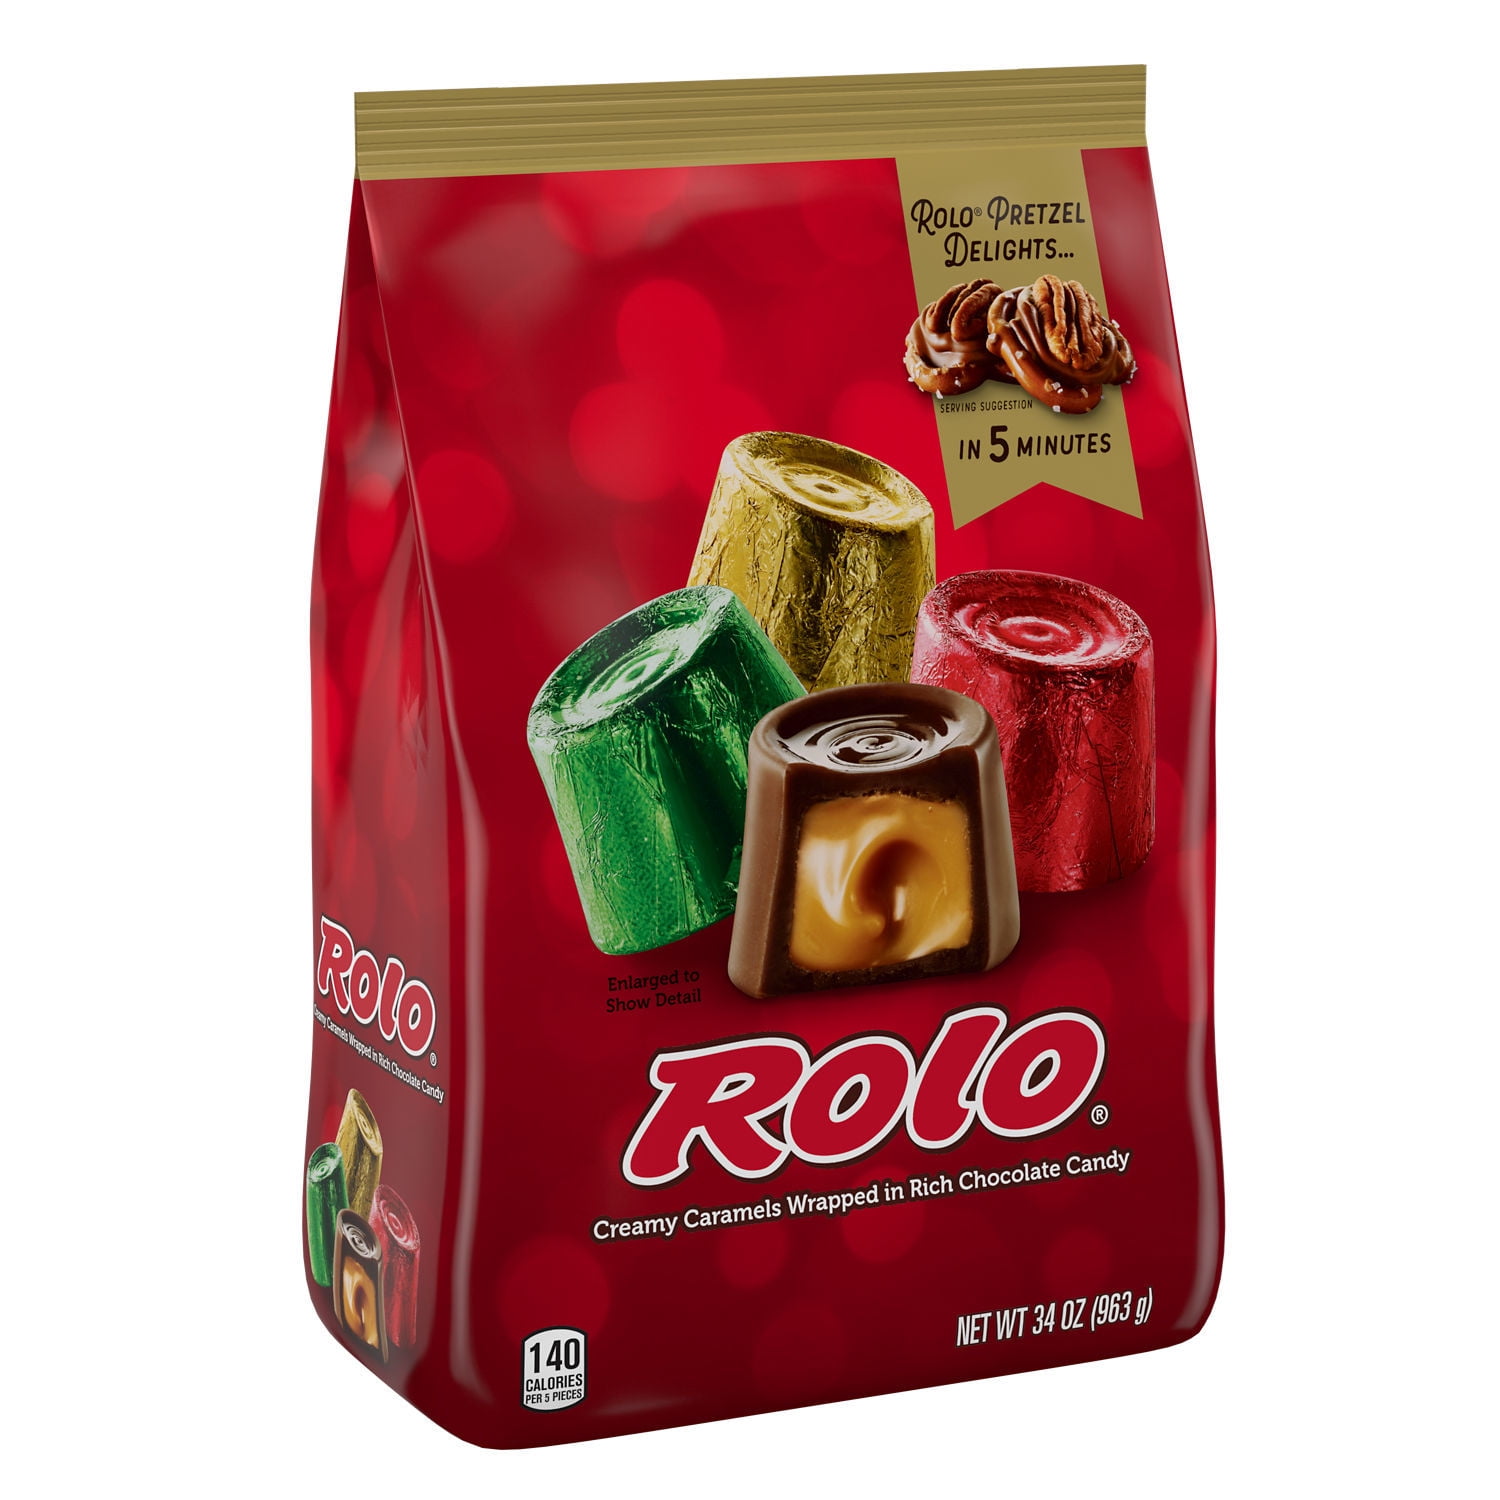 ROLO®, Creamy Caramels Wrapped in Rich Chocolate Candy, Christmas, 34 oz, Bulk Bag